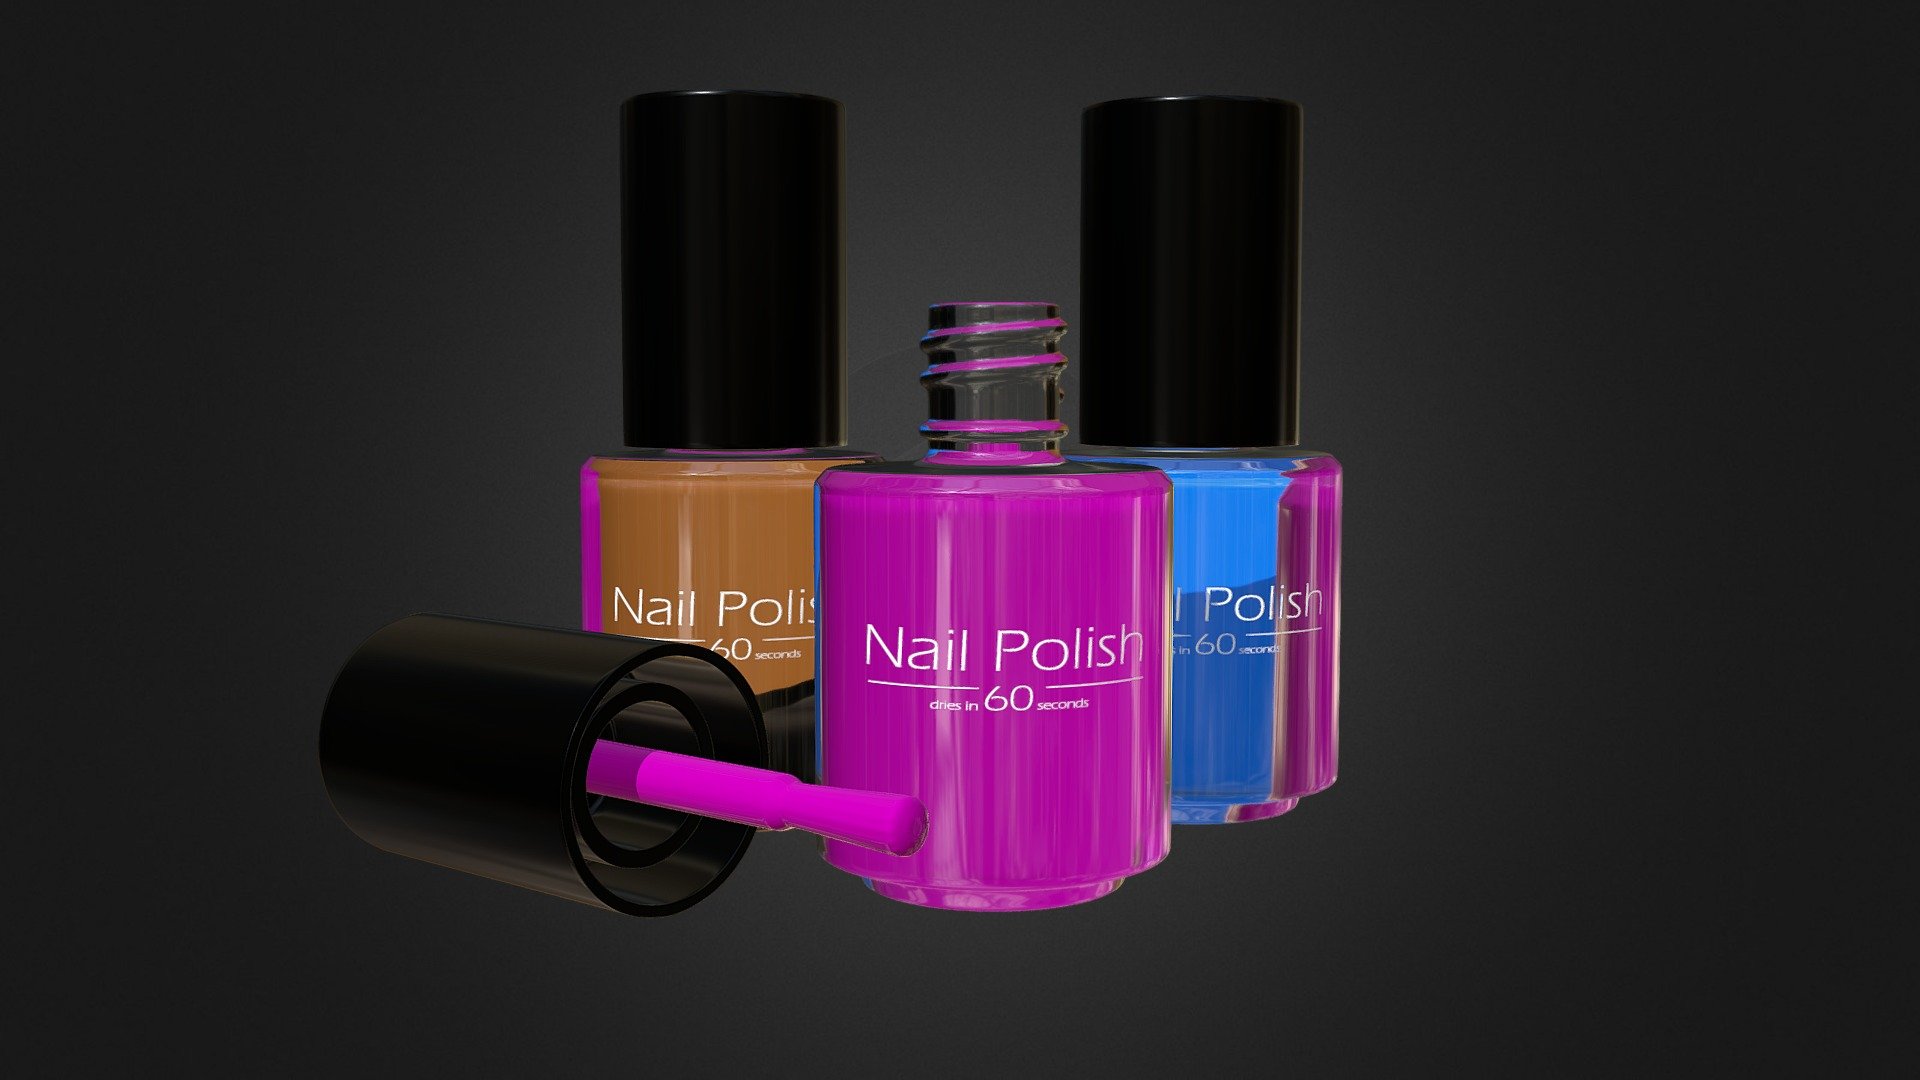 High Poly Nail Polish model created in Blender (6.360 Verts per bottle, without subsurf)


 GEOMETRY 
Clean geometry, quads only. No ngons! Modifiers are not applied, so you still have full and easy geometry control.


MODIFIERS



subsurf (level 2)

mirror


TEXTURES
This model includes a black and white JPG image texture (1.024 X 1.024) to print the label on the bottle. To put your own label on the bottle, you just need to replace this image. The color of the label can be setup in the glass material.


MATERIALS
6 materials created with nodes for Cycles Render. All colors are changeable in the node setup.




glass with lable

polish pink

polish blue

polish red

polish skin

plastic black


SCALE
The model is in real world size and scale.




X = 0,040m (Blender units)

Y = 0,040m (Blender units)

Z = 0,092m (Blender units)


RENDERS



https://www.dropbox.com/s/vl3tnx7vsukae7h/thumb_02.png

https://www.dropbox.com/s/61049wcz01jruo1/signature.png
 - Nail Polish - Buy Royalty Free 3D model by BlendingBastian 3d model